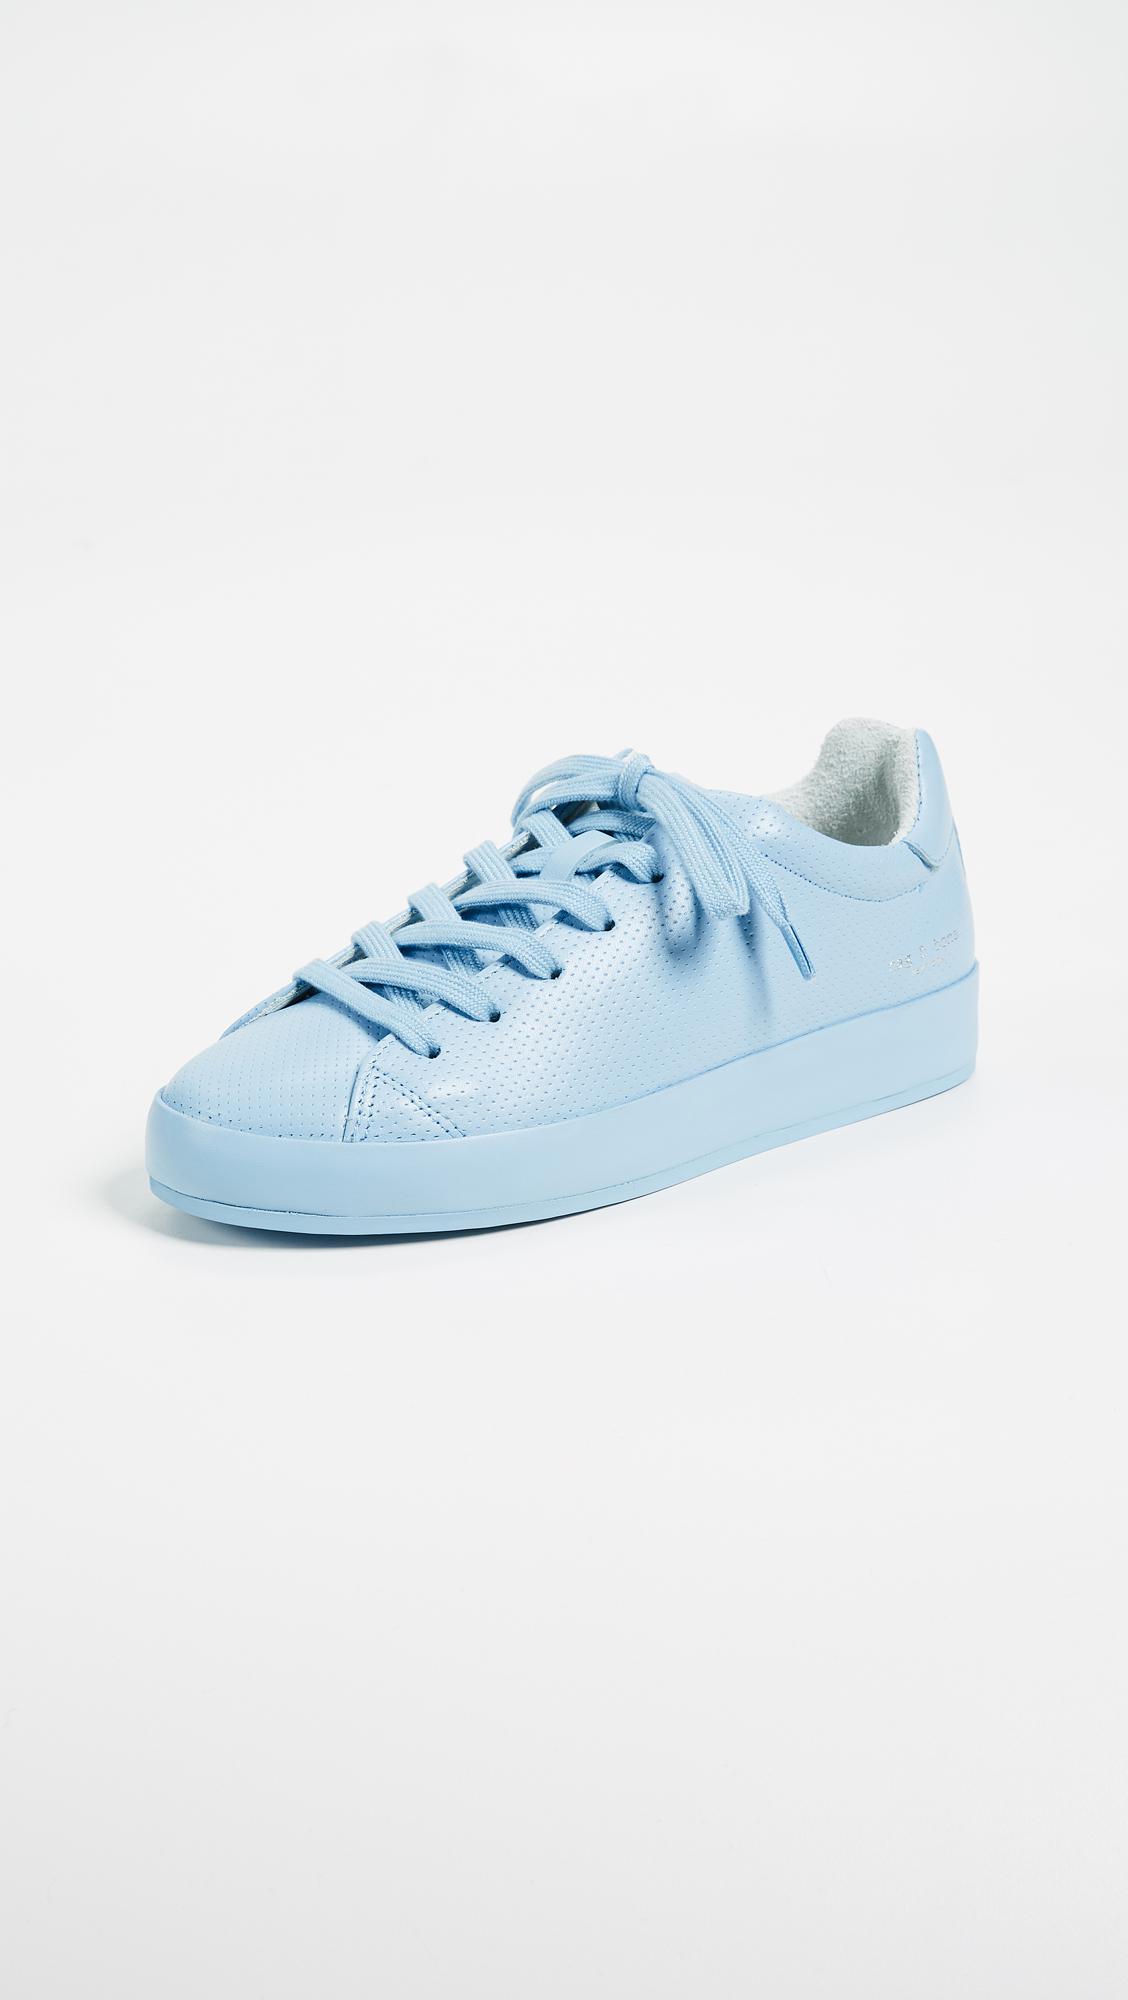 Rag & Bone Leather Rb1 Low Sneakers in Chambray (Blue) - Lyst